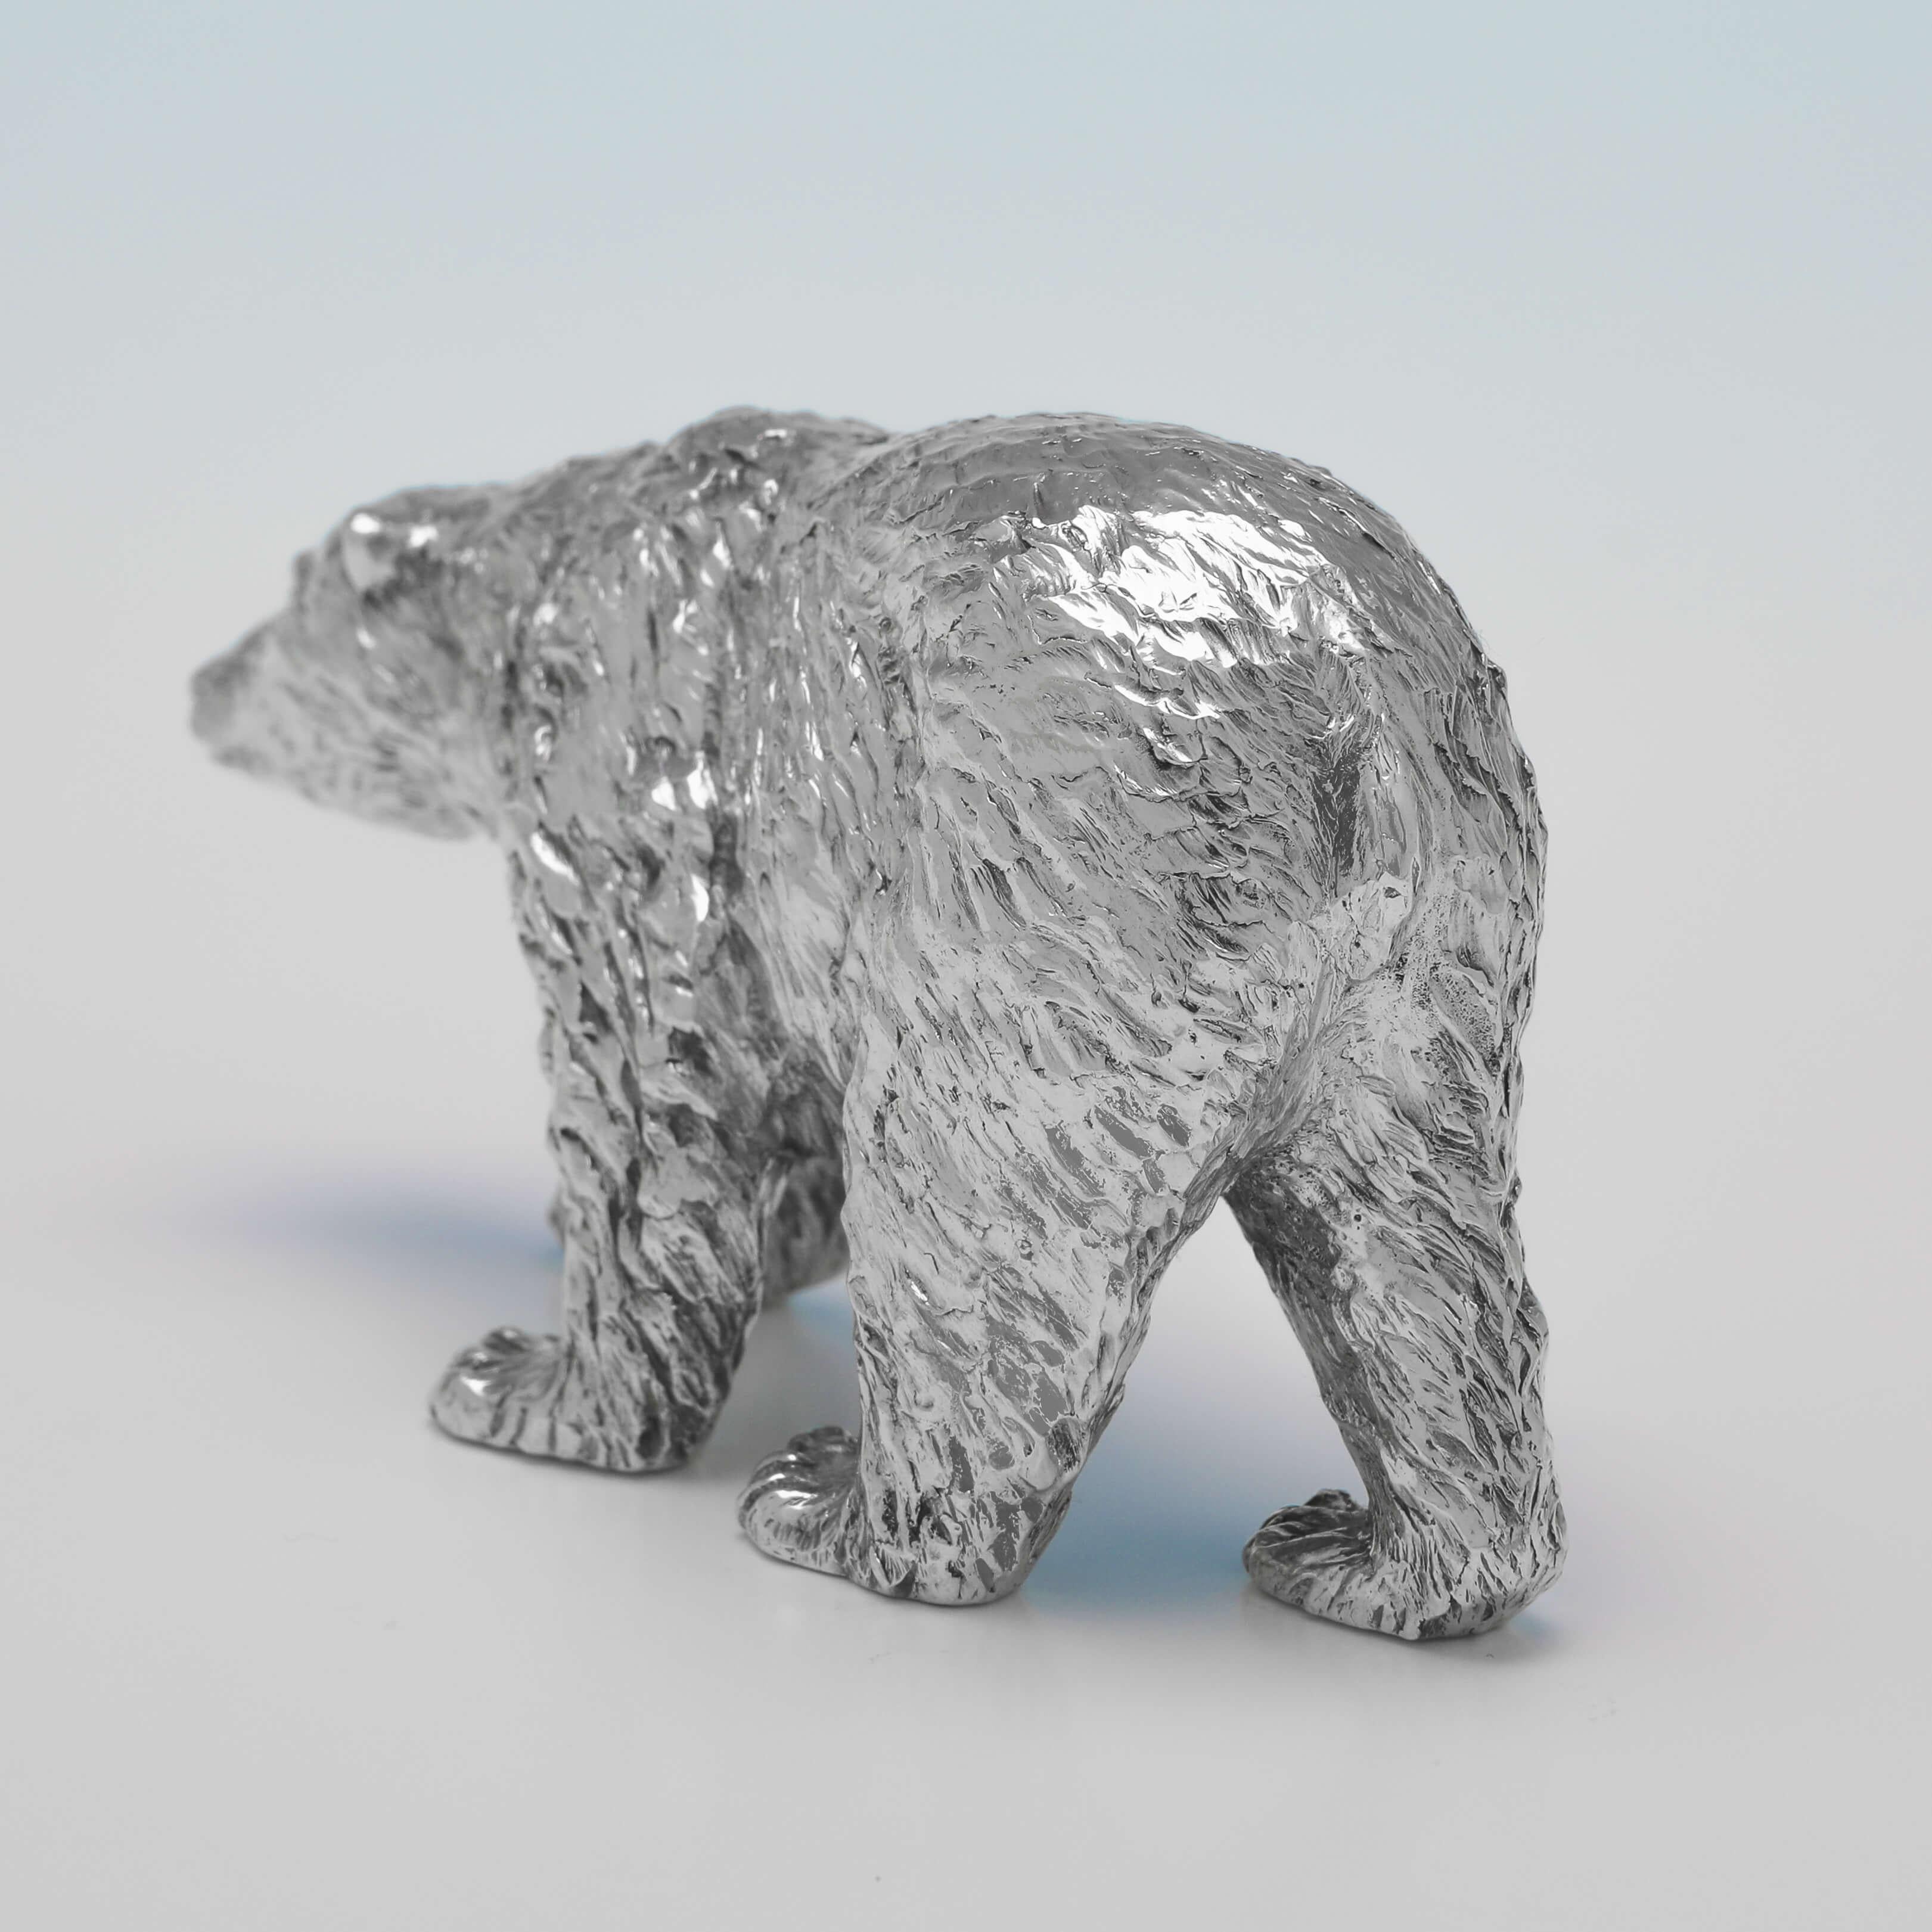 English Realistically Cast Sterling Silver Model of a Polar Bear from 2013